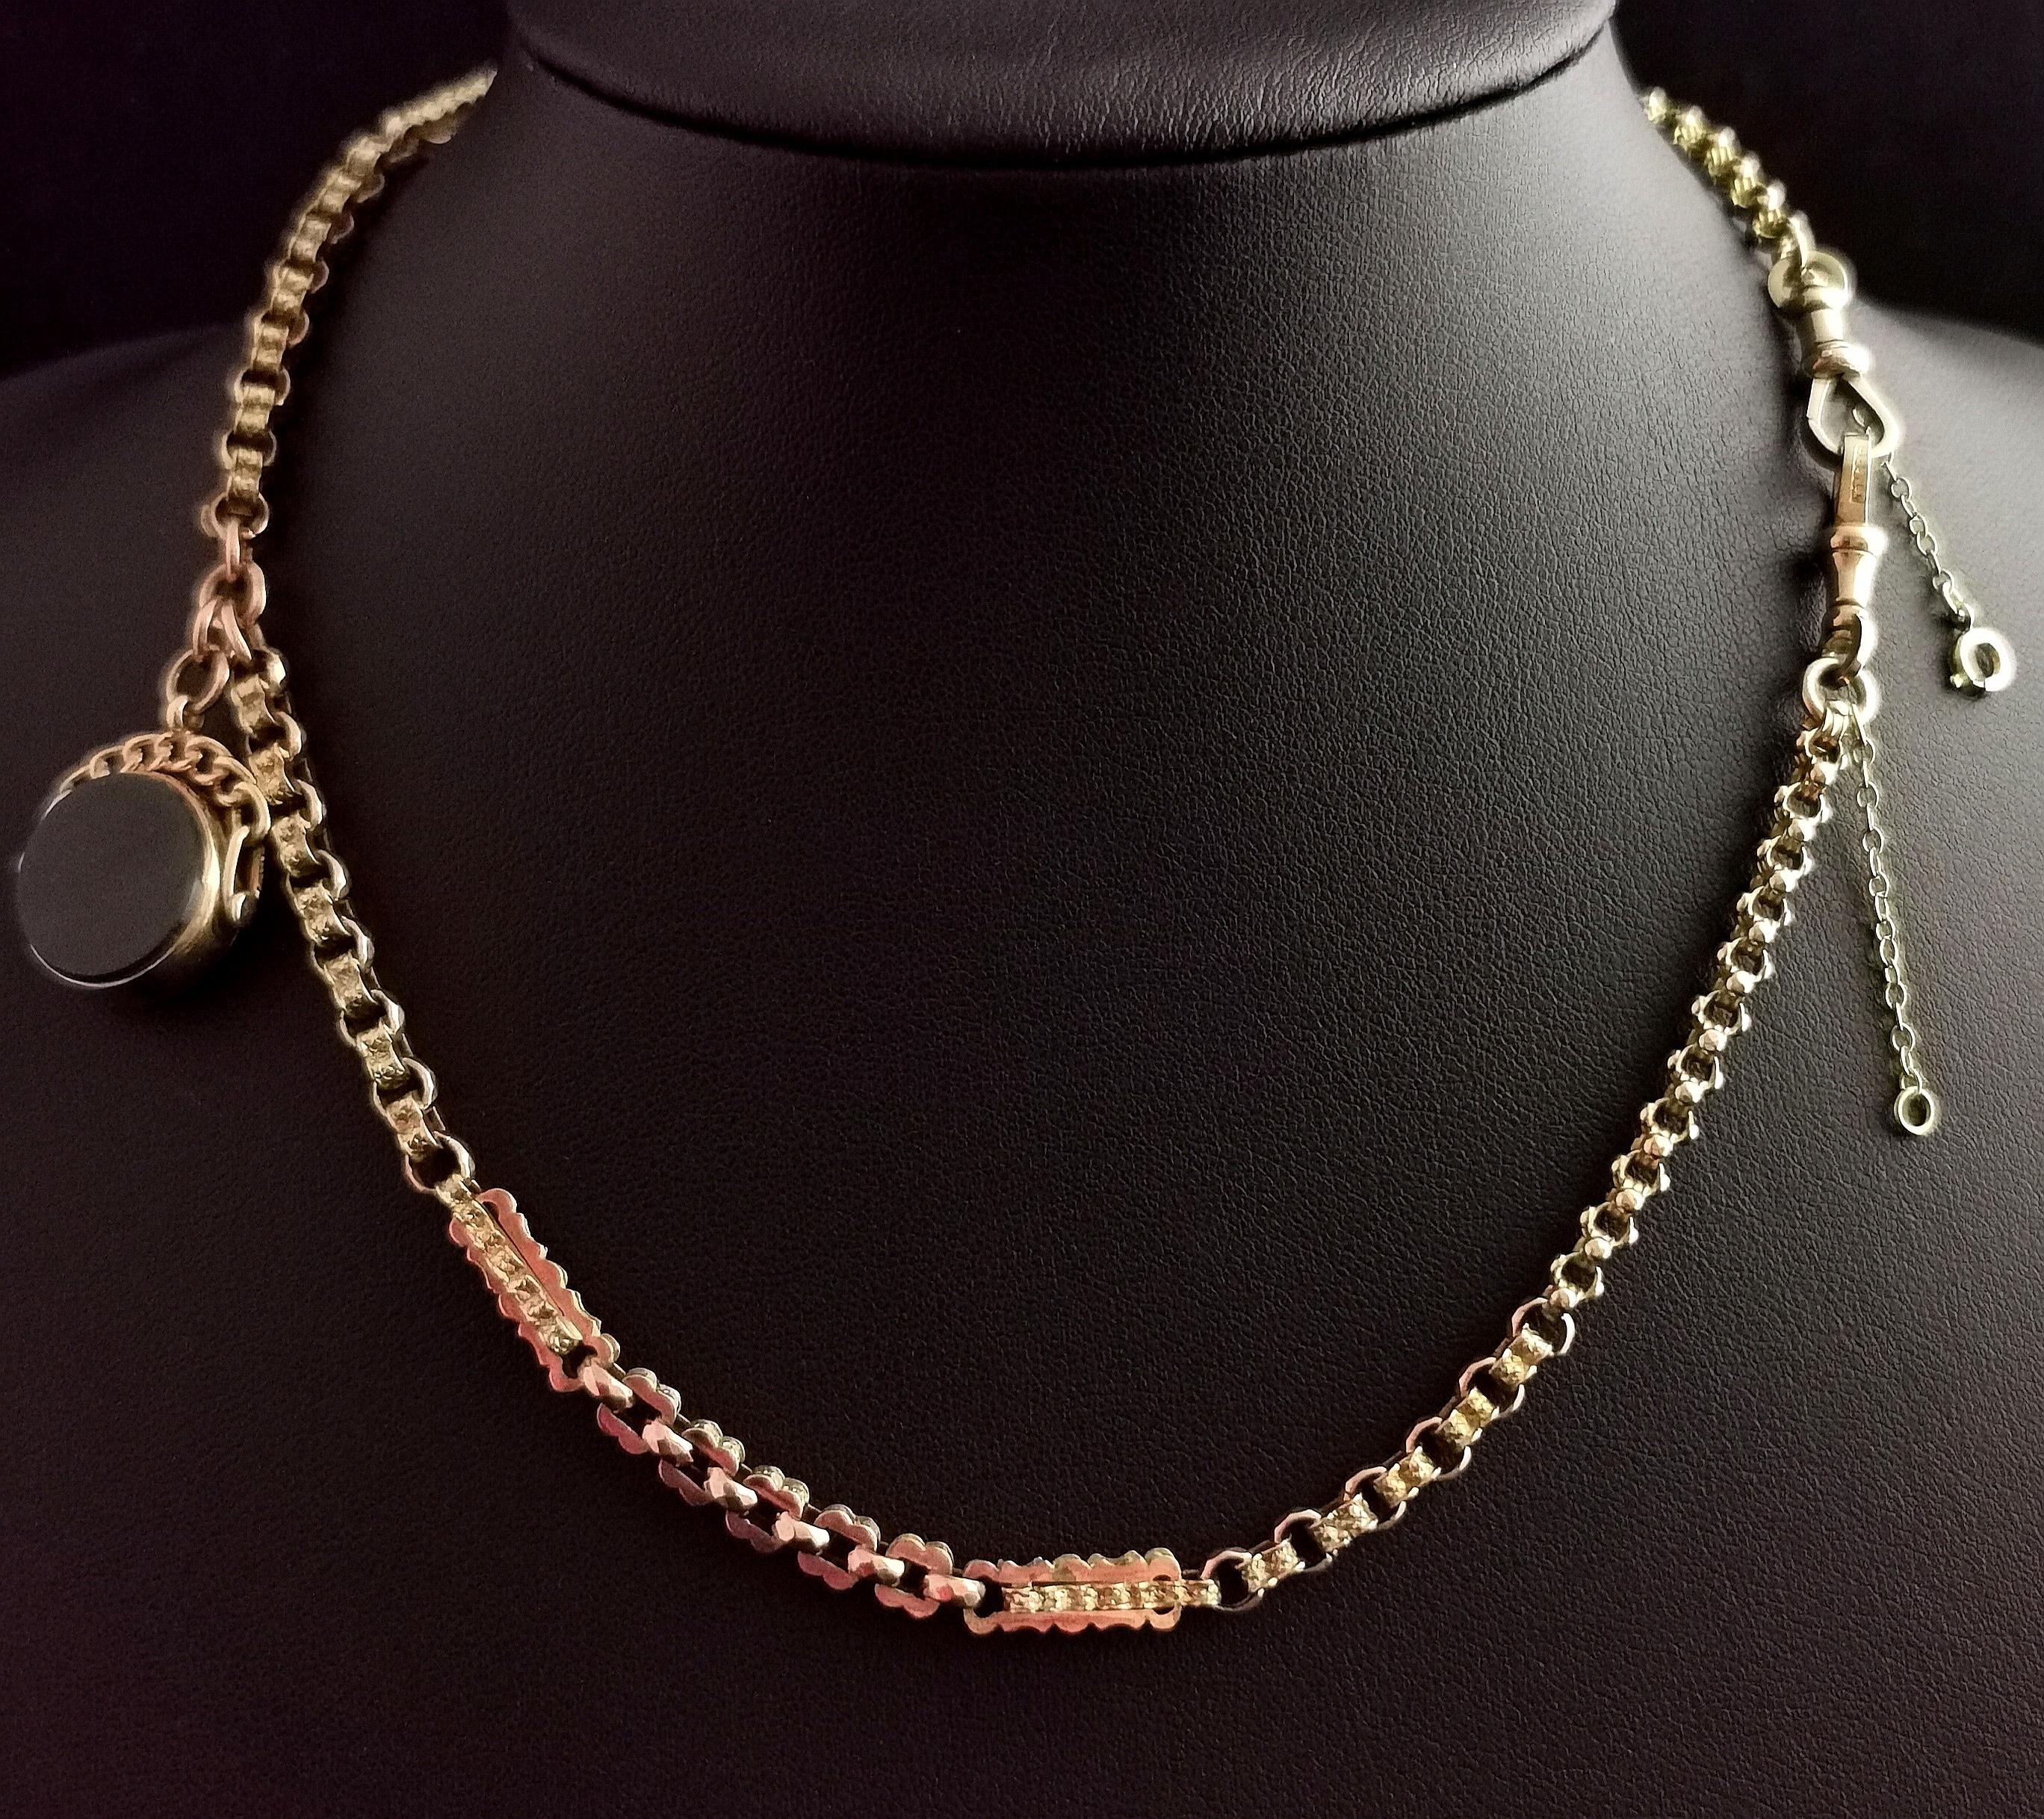 A gorgeous antique 9kt gold, fancy link Albert chain.

It has lovely fancy rich solid gold links with very slight rosey tones, the links are two different types with an interlocking bar and square links joined with faceted rolos, such a gorgeous and